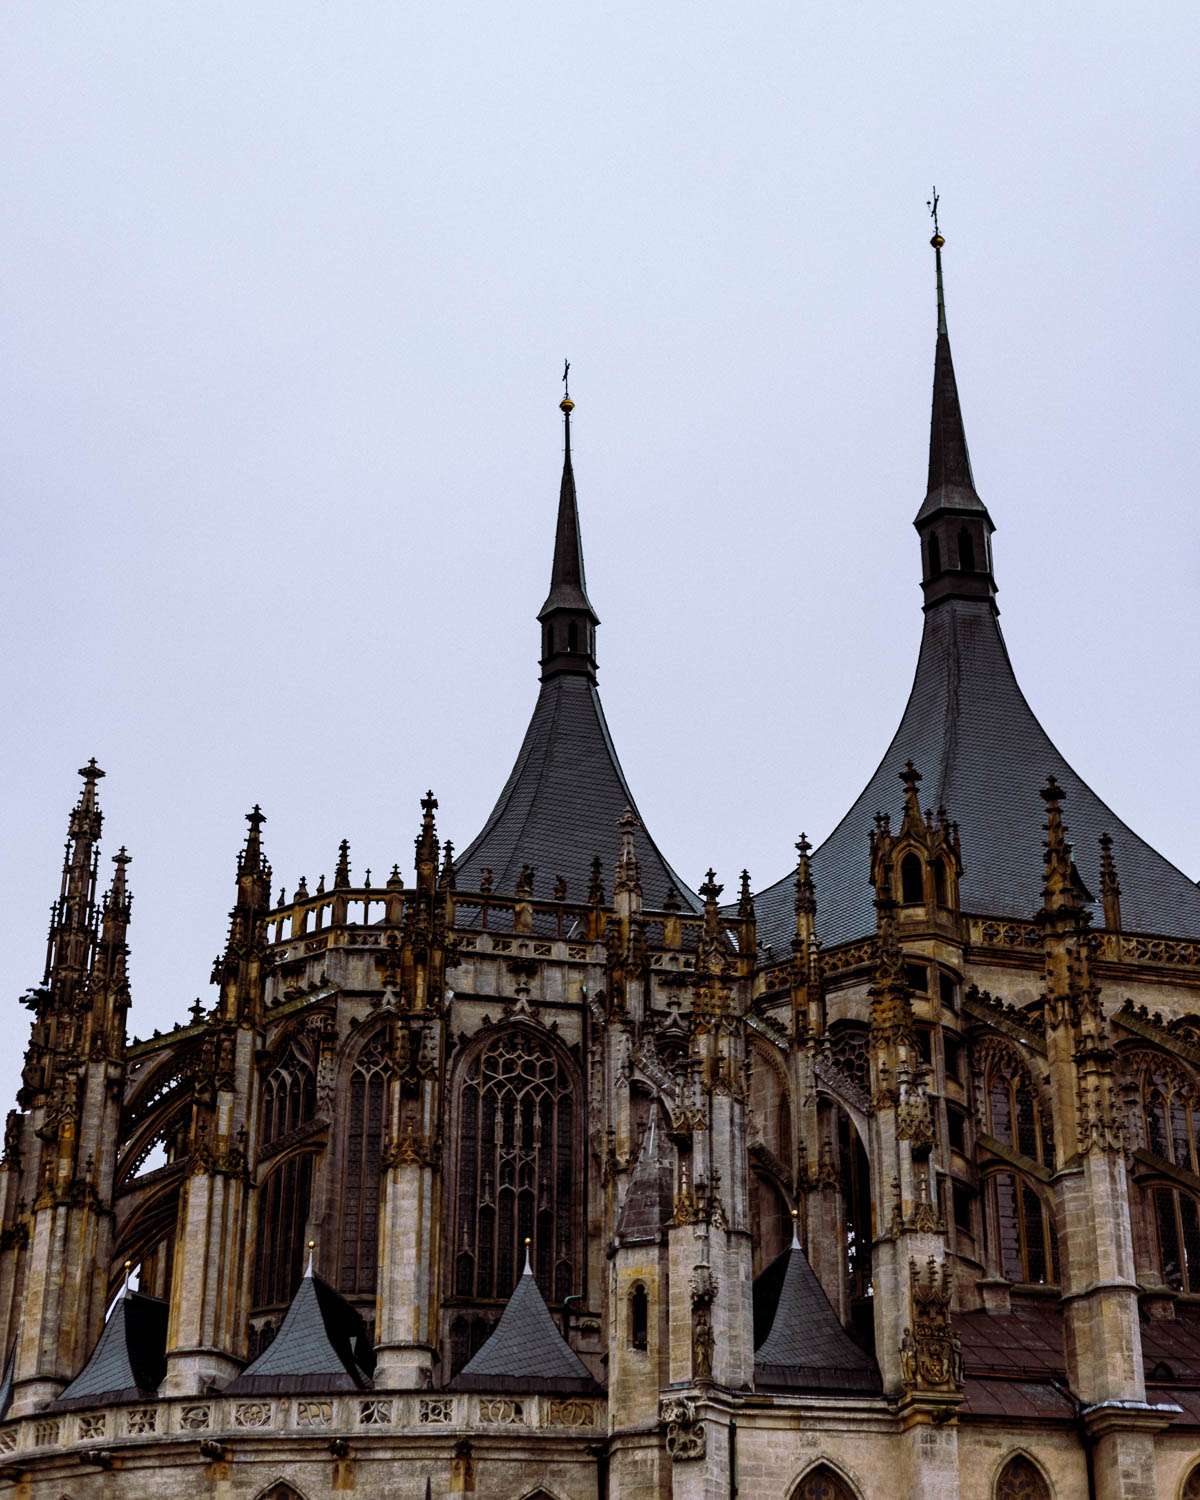 Rachel Off Duty: Amazing Places to Visit in the Czech Republic - Kutna Hora